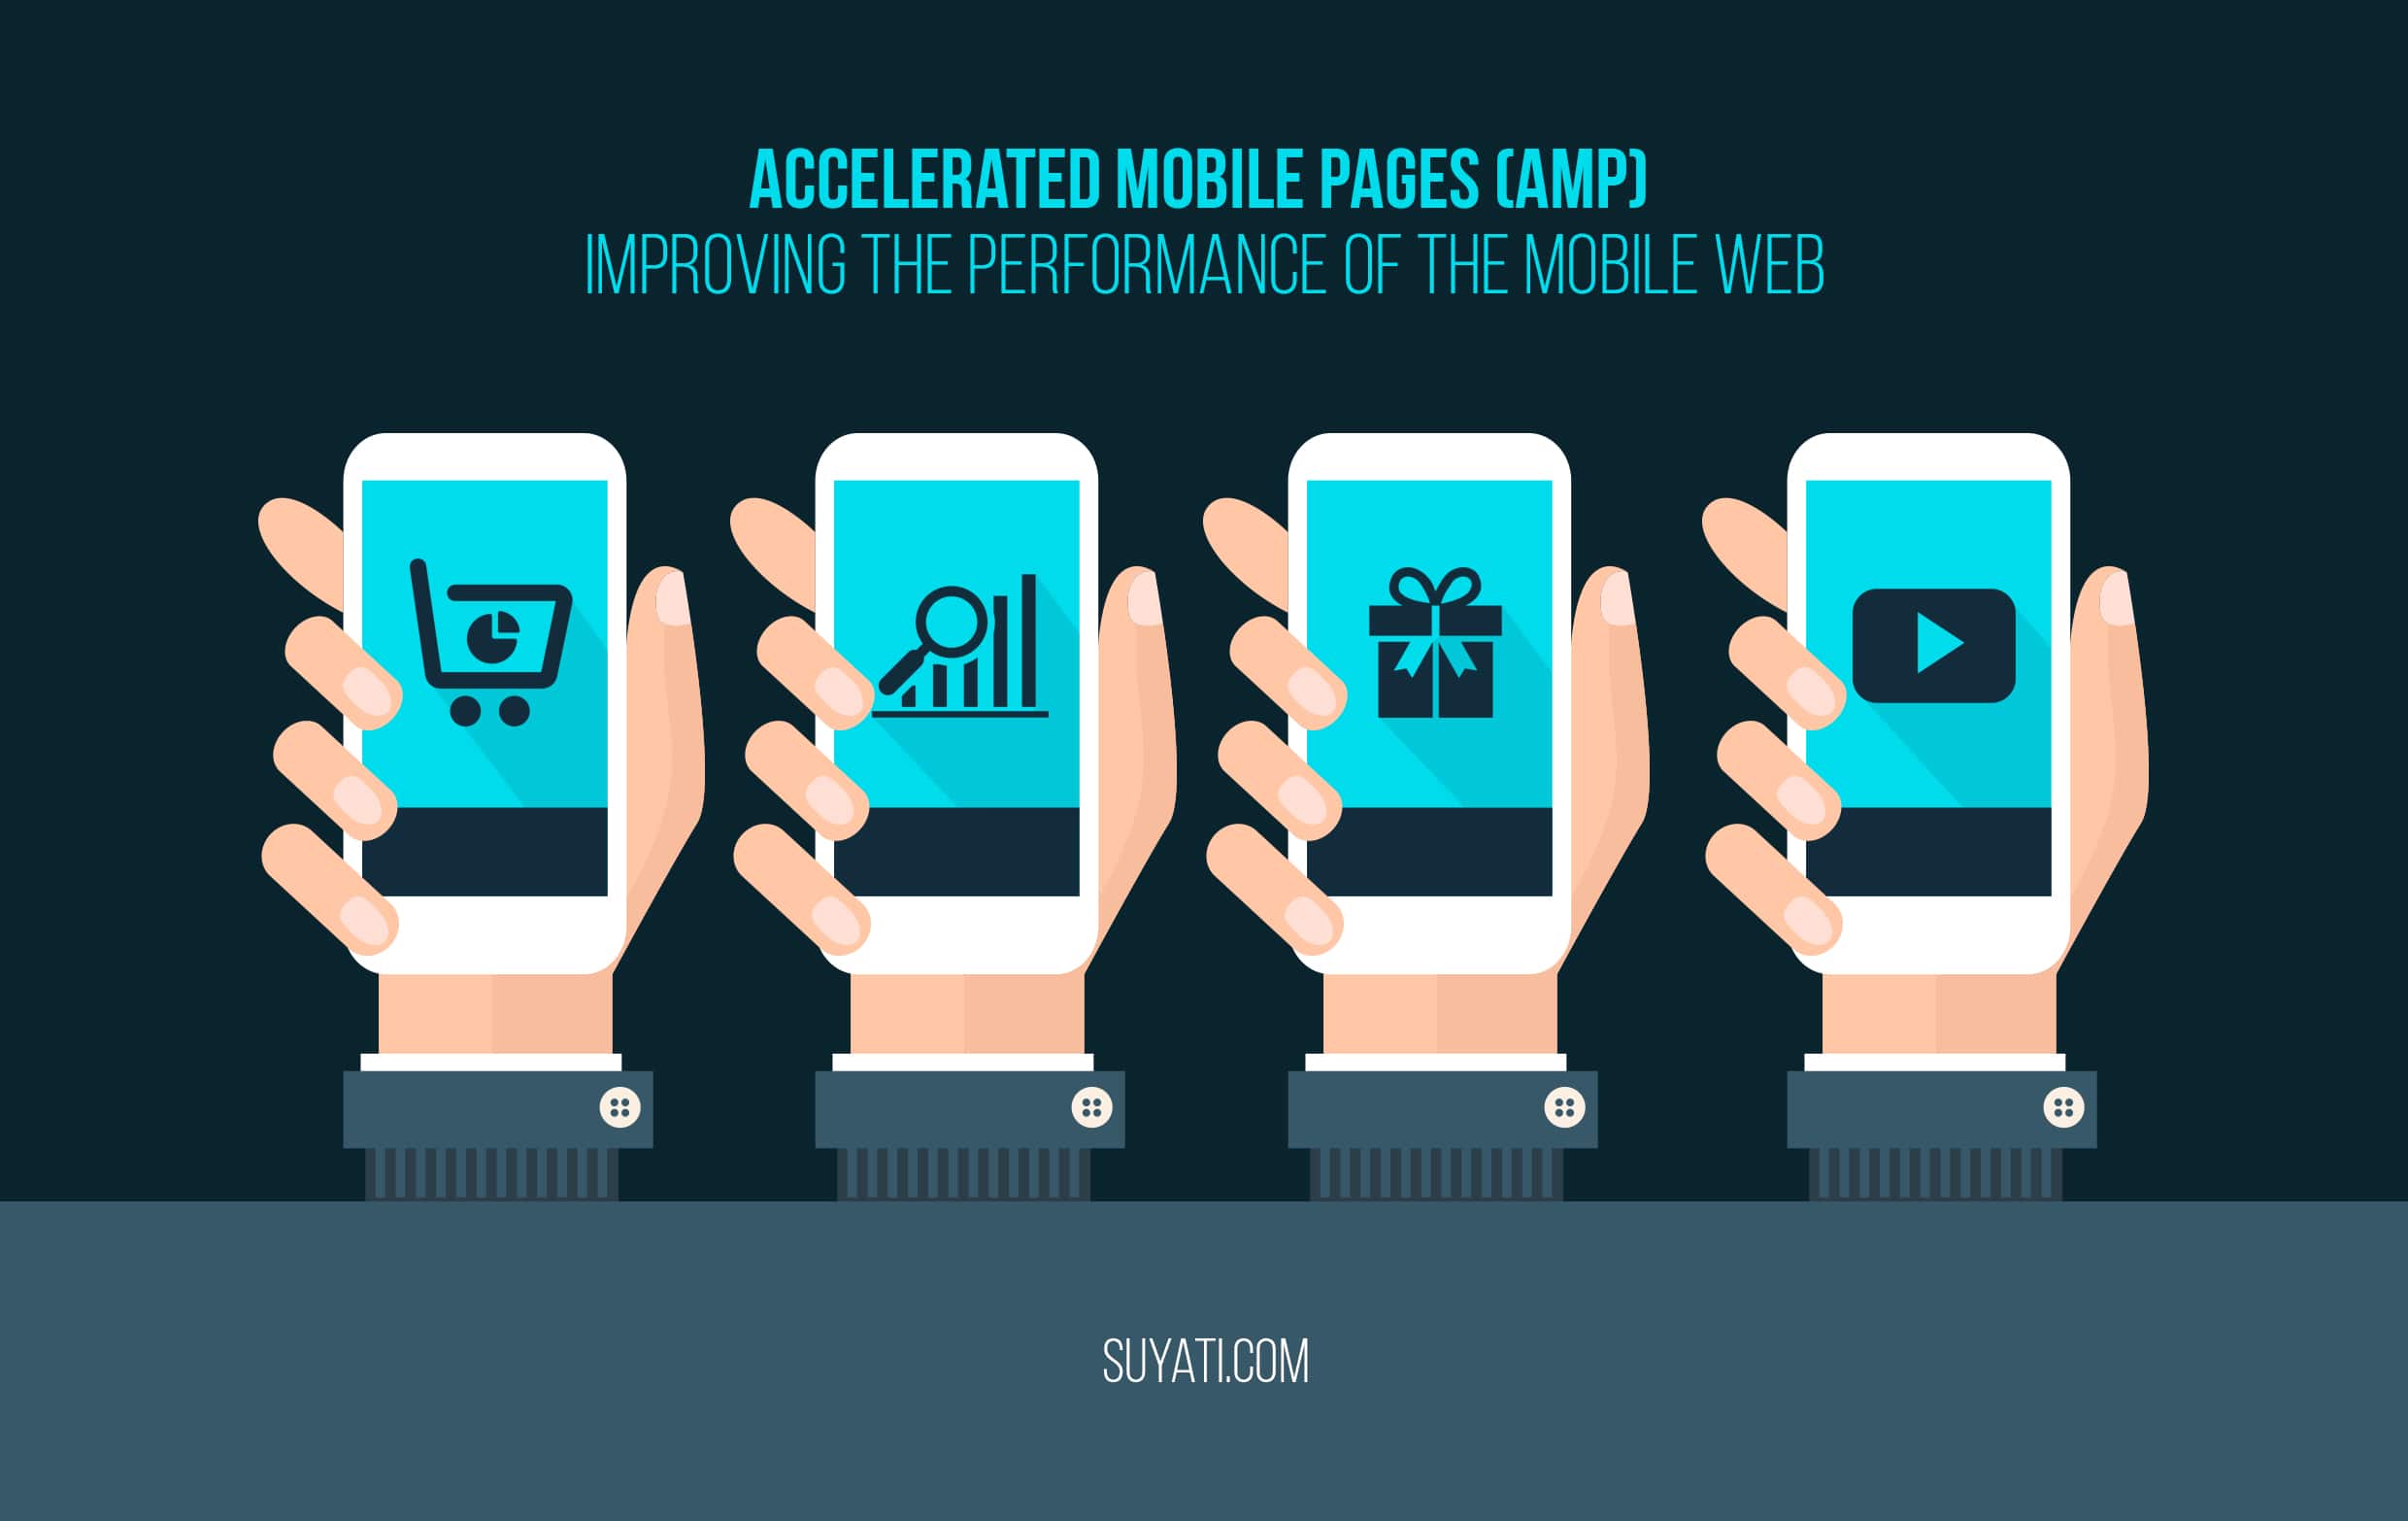 Google’s  Accelerated Mobile Pages